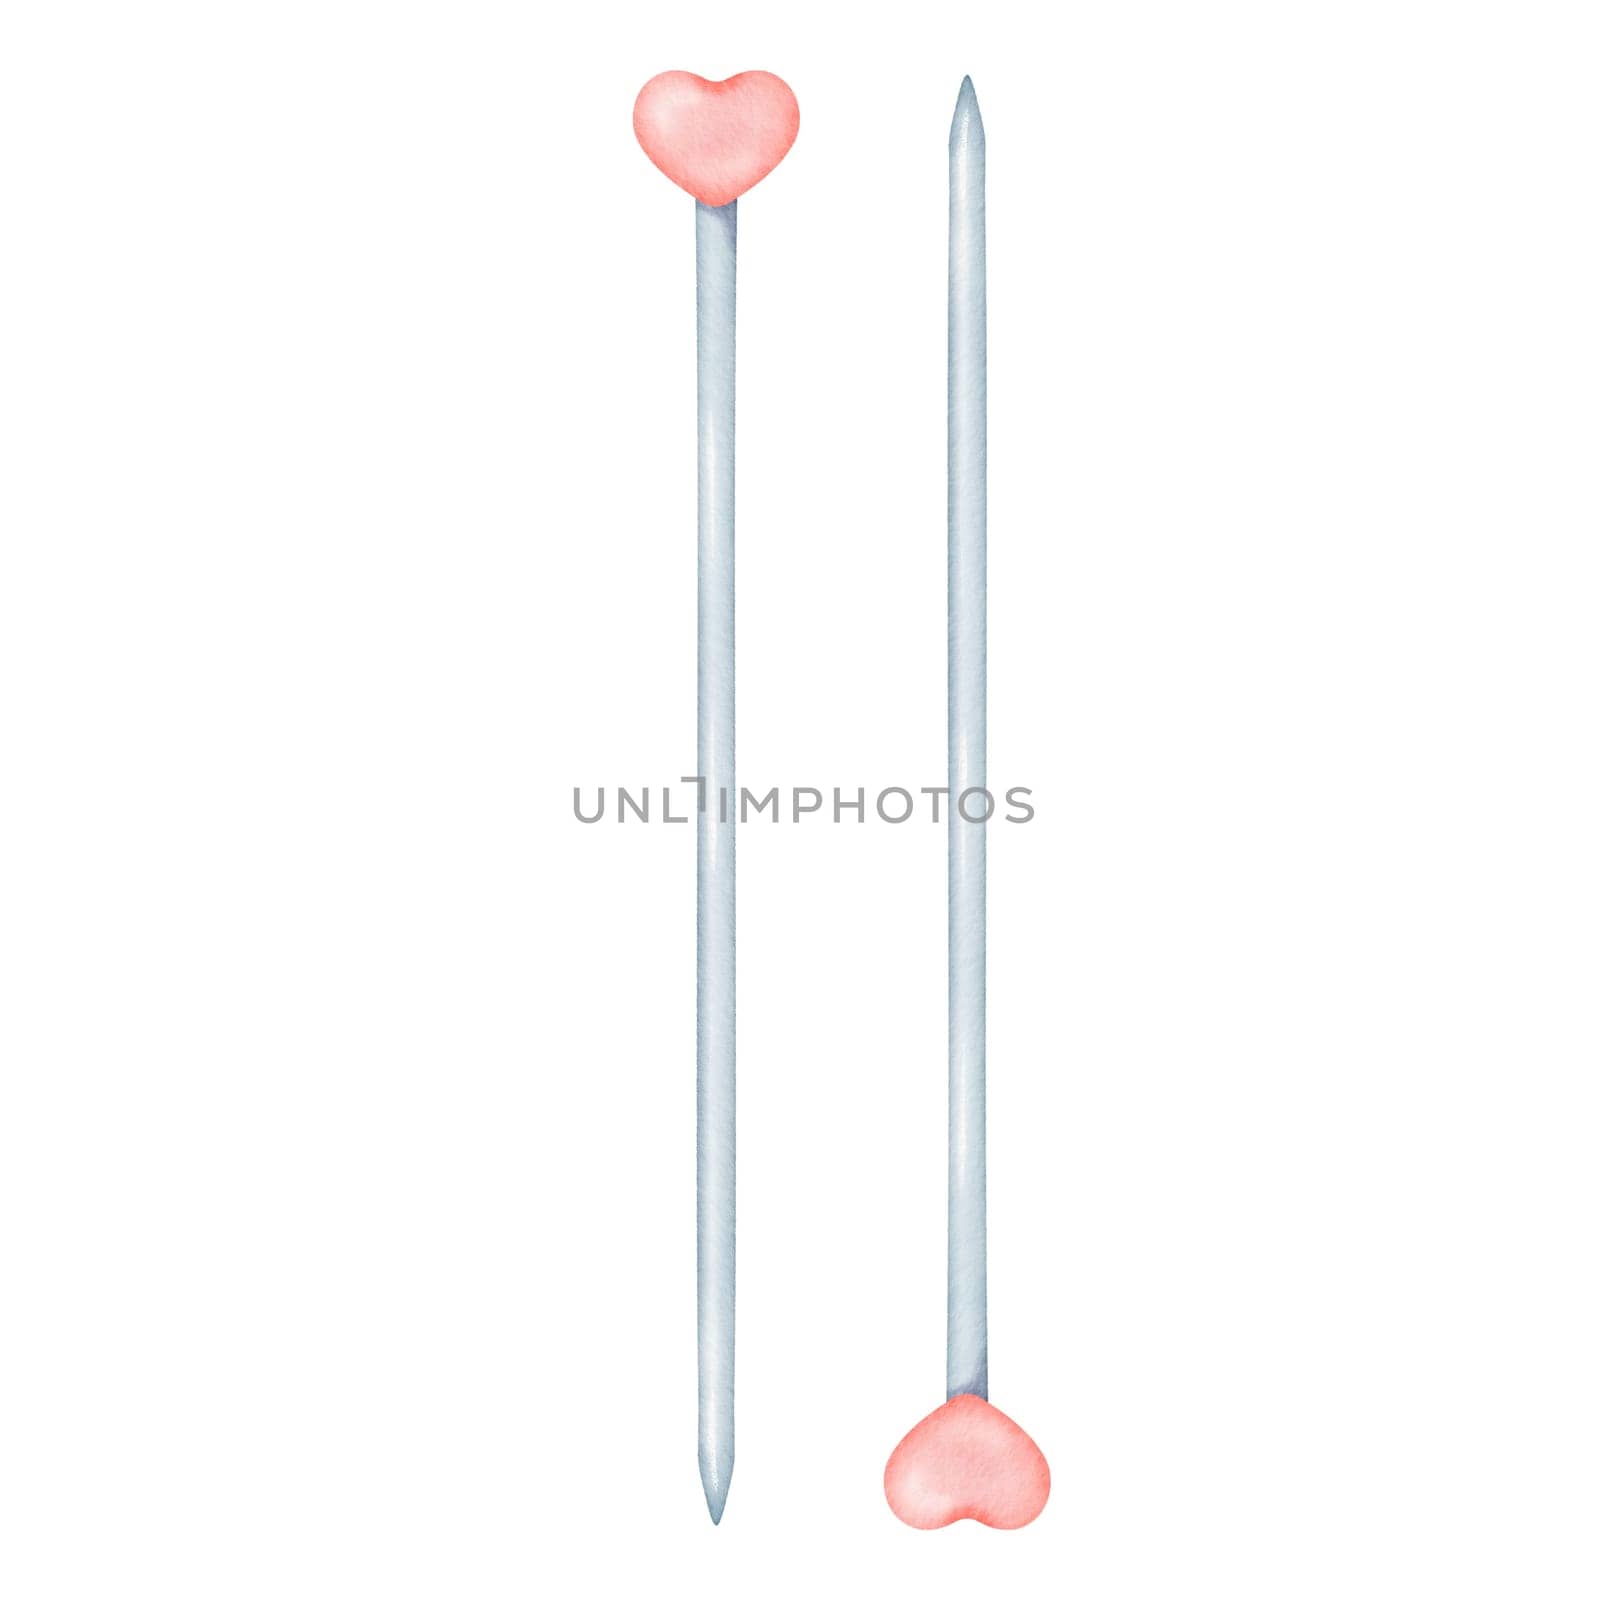 Metal knitting needles enhanced with charming plastic heart-shaped adornments. watercolor illustration. Ideal for crafting tutorials, knitting enthusiasts' blogs, or DIY-themed designs.